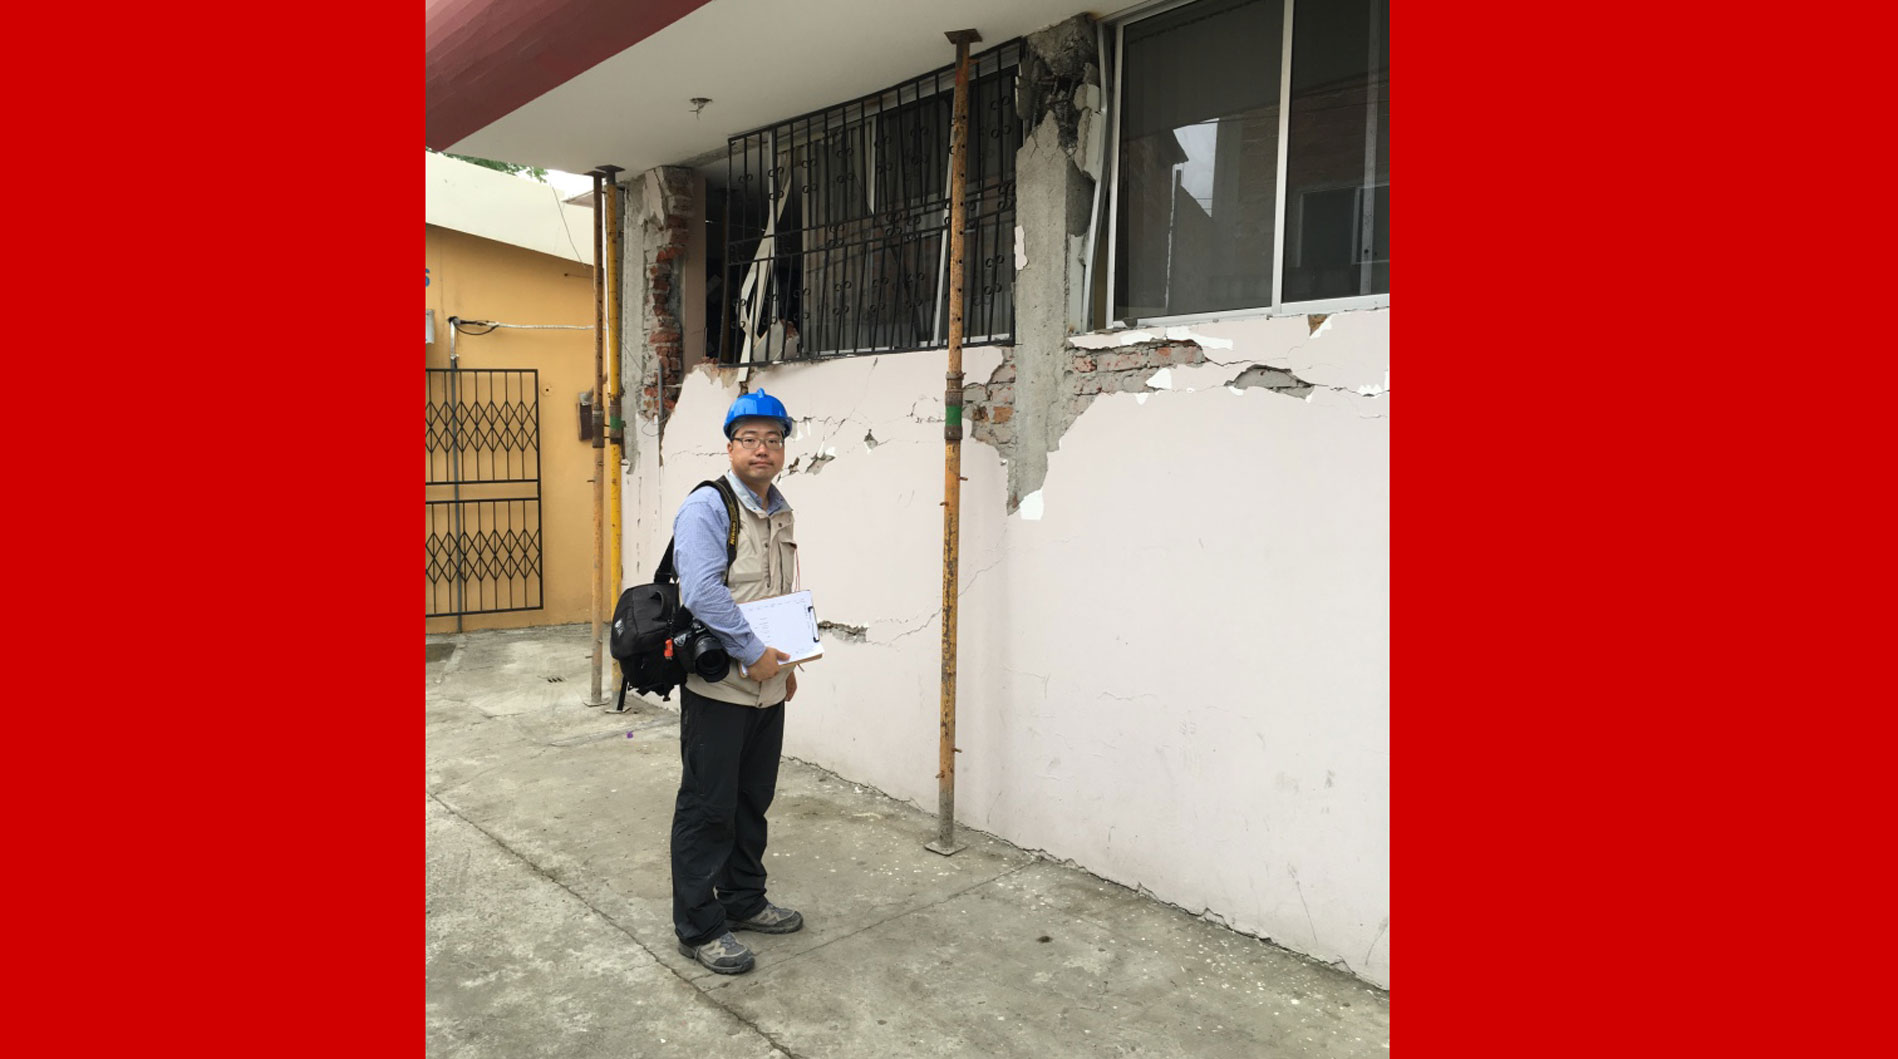 Dr. Sim surveying captive columns after the April 2016 earthquake in Ecuador. The results of this survey have been uploaded to the DataCenterHub platform.